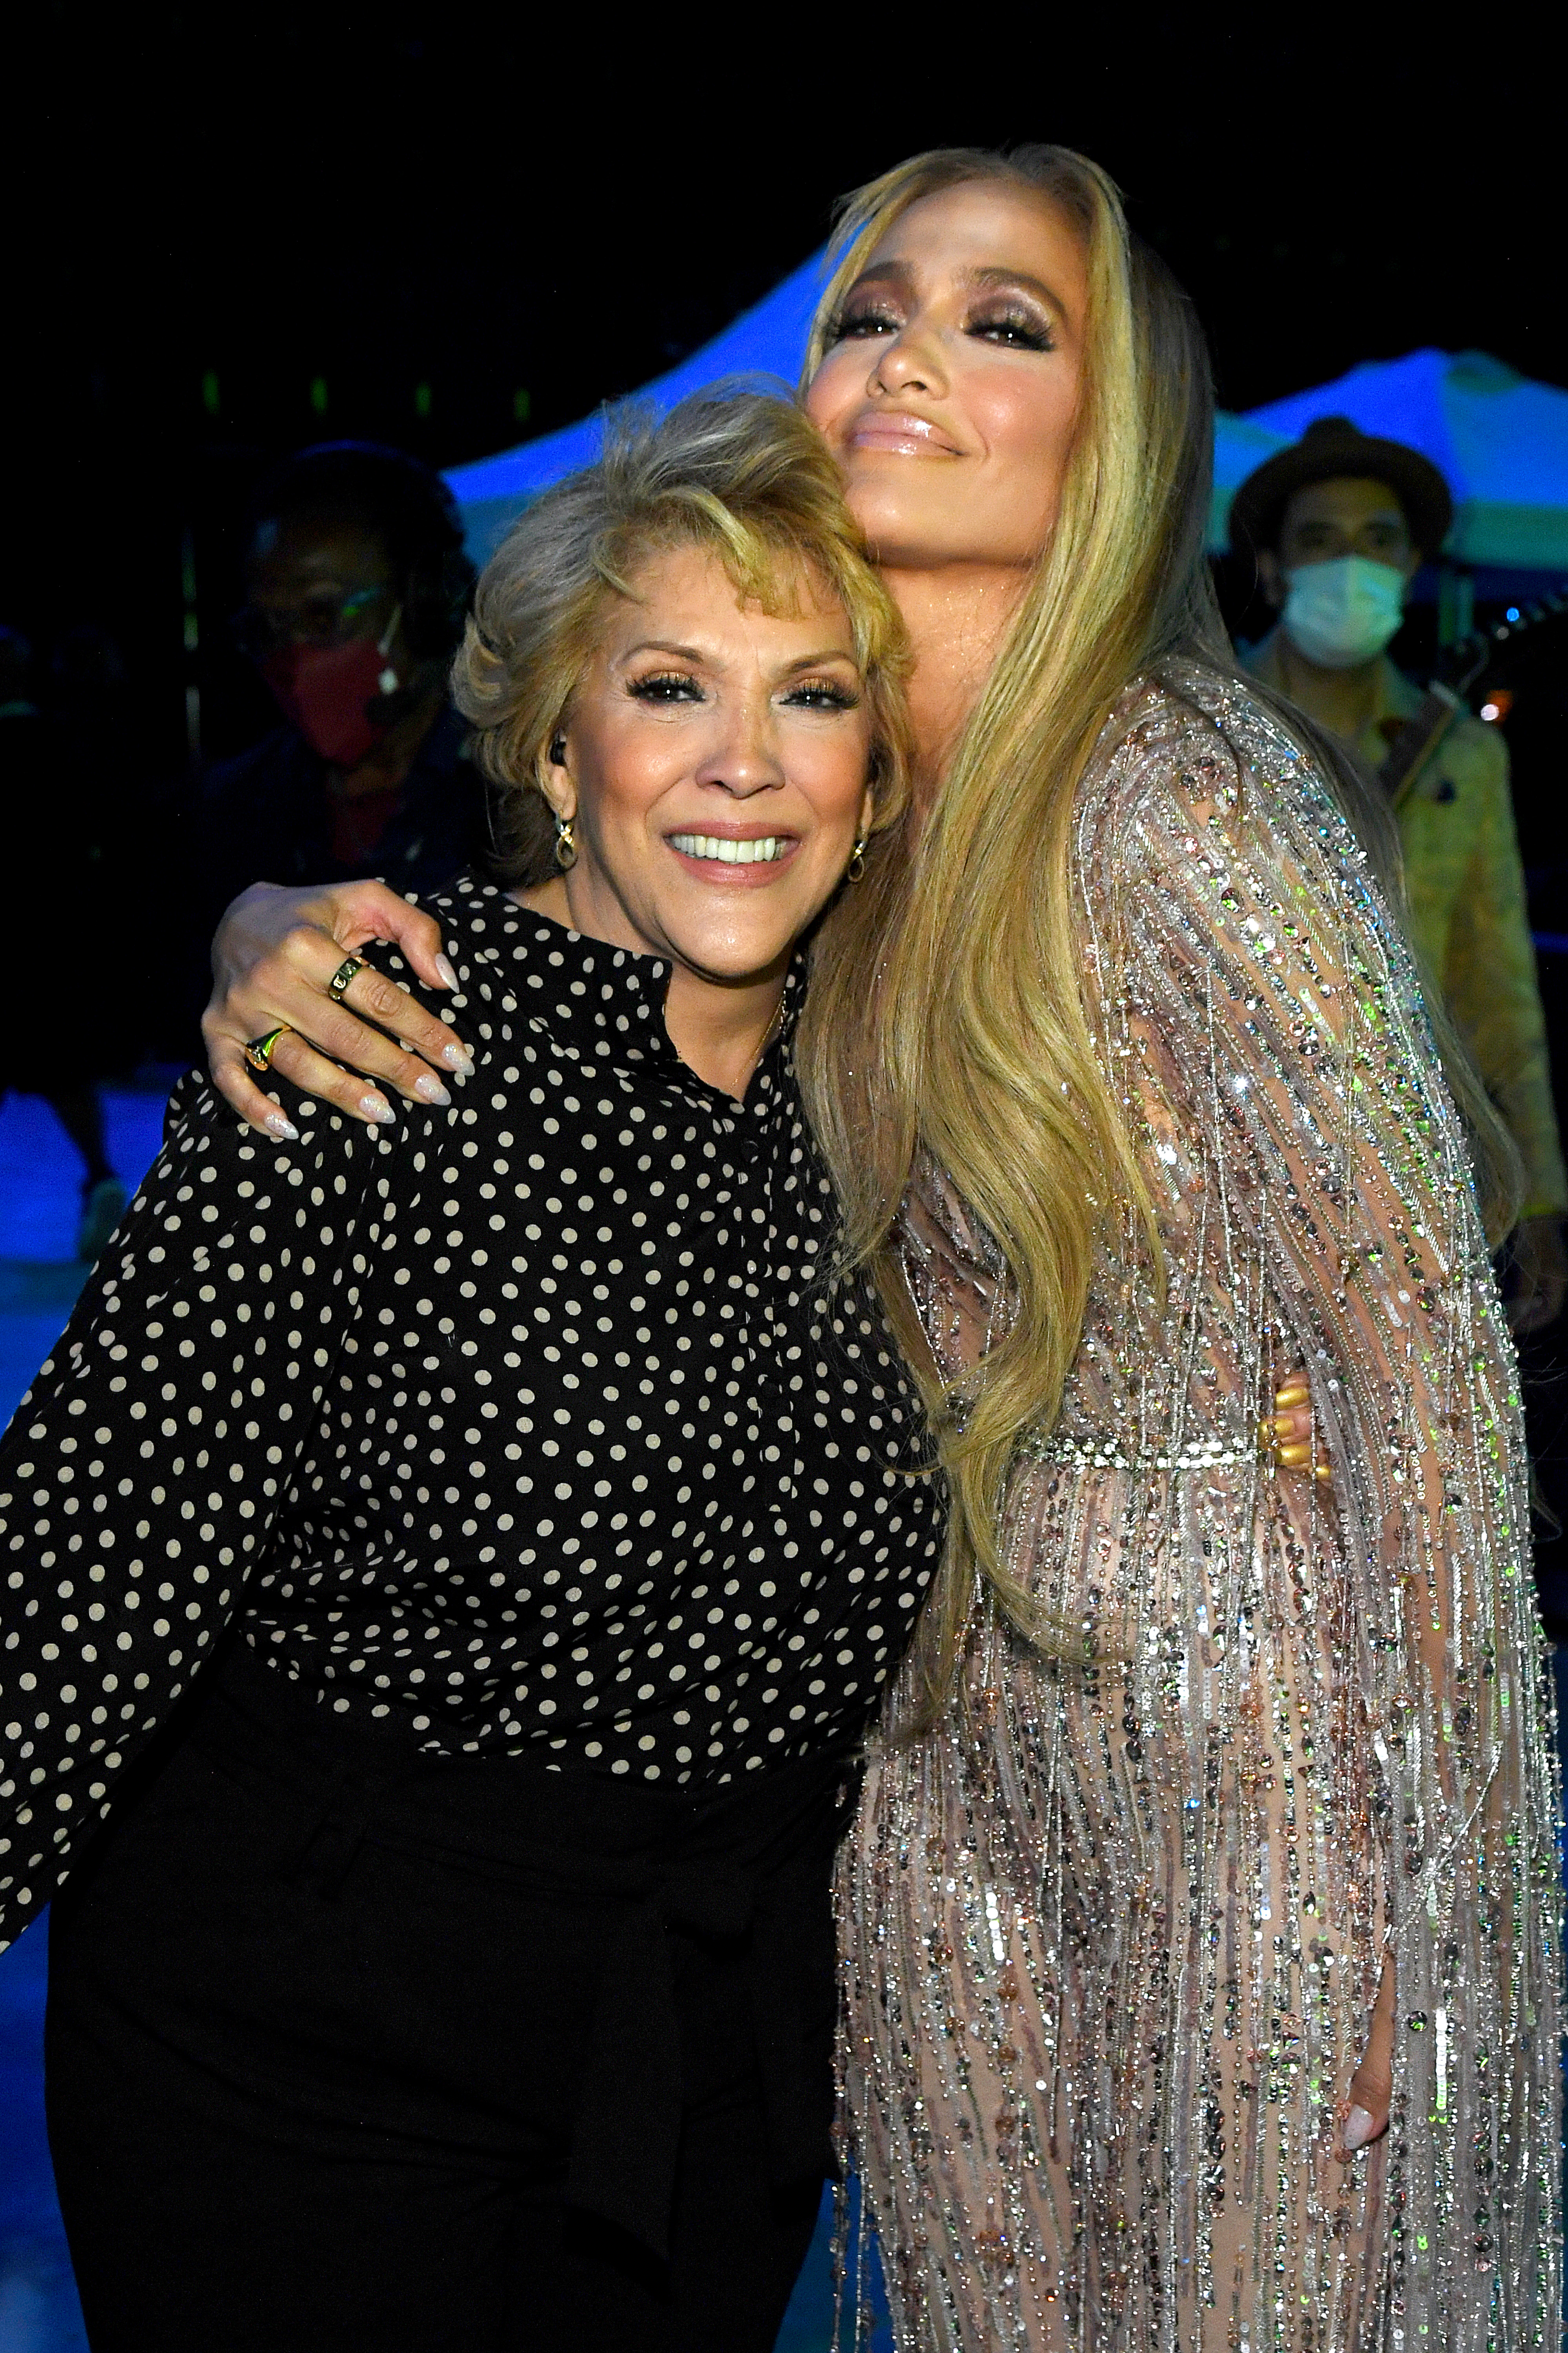 Jennifer Lopez and Guadalupe Rodríguez backstage during Global Citizen VAX LIVE: The Concert To Reunite The World in Inglewood, California, on May 2, 2021. | Source: Getty Images